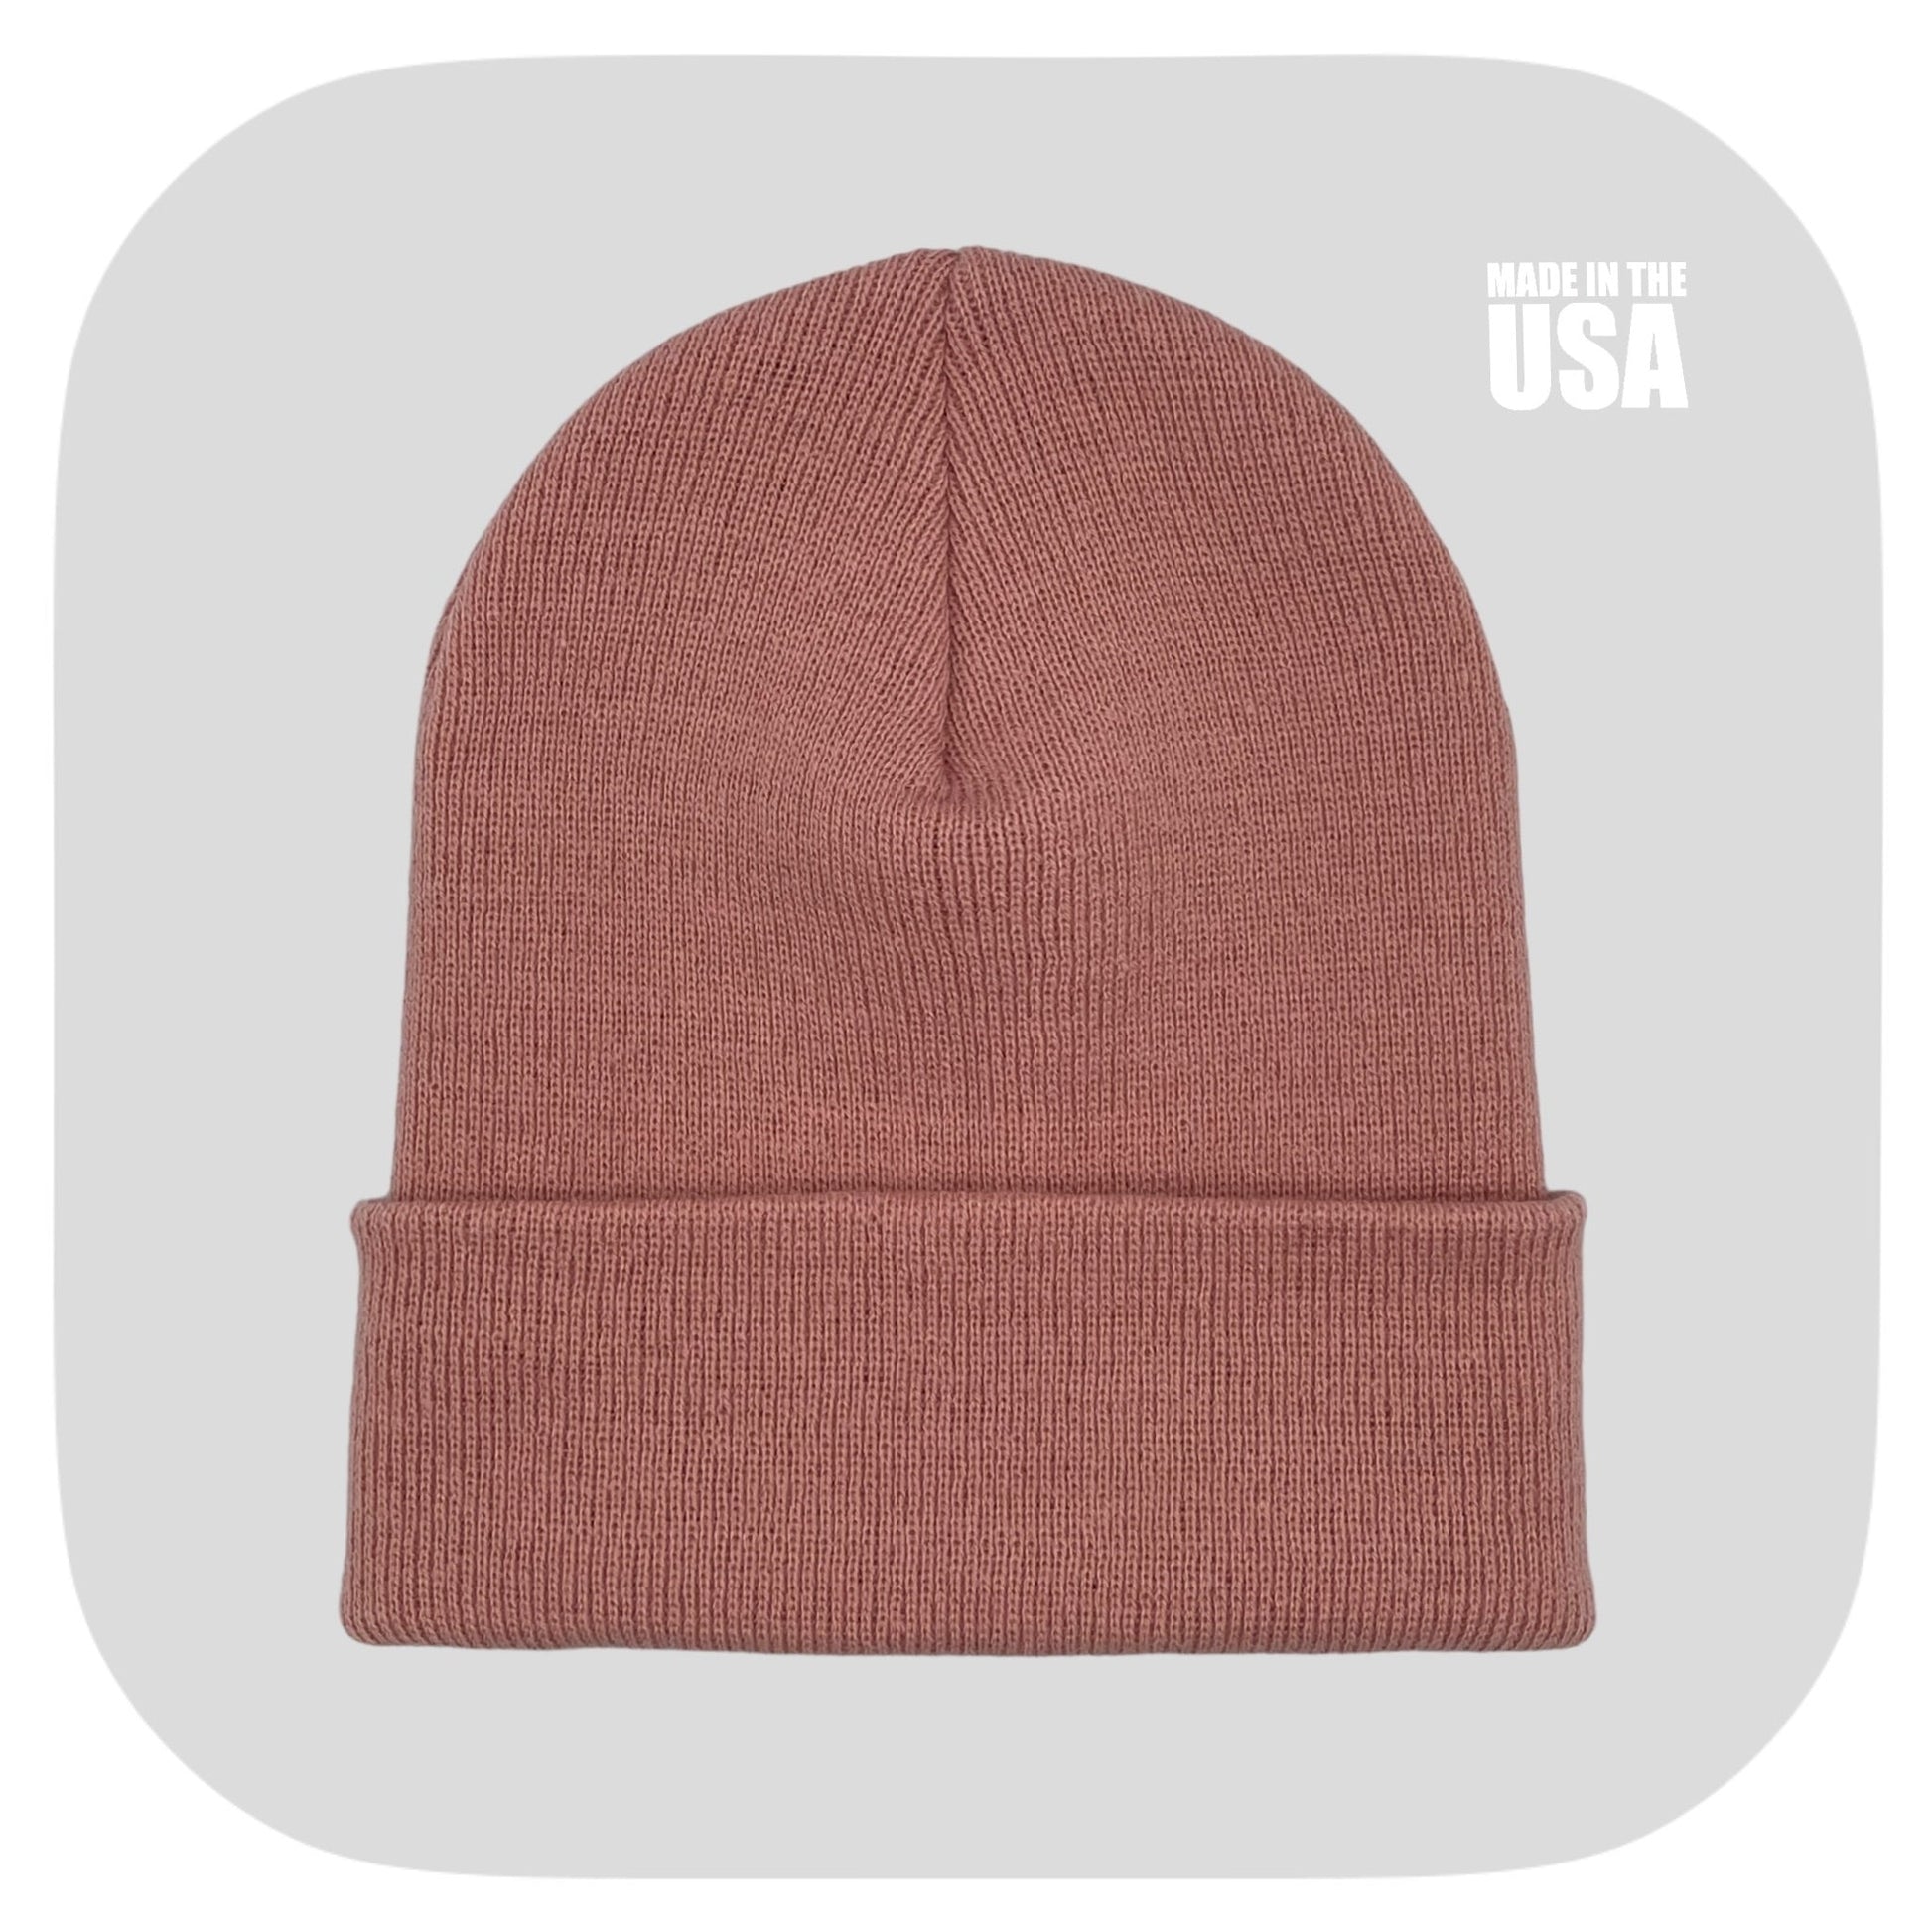 Blank Beanie Factory Cuffed Winter Hat, Wholesale price, Premium Quality, Burgundy, Made in U.S.A - The Beanie Factory